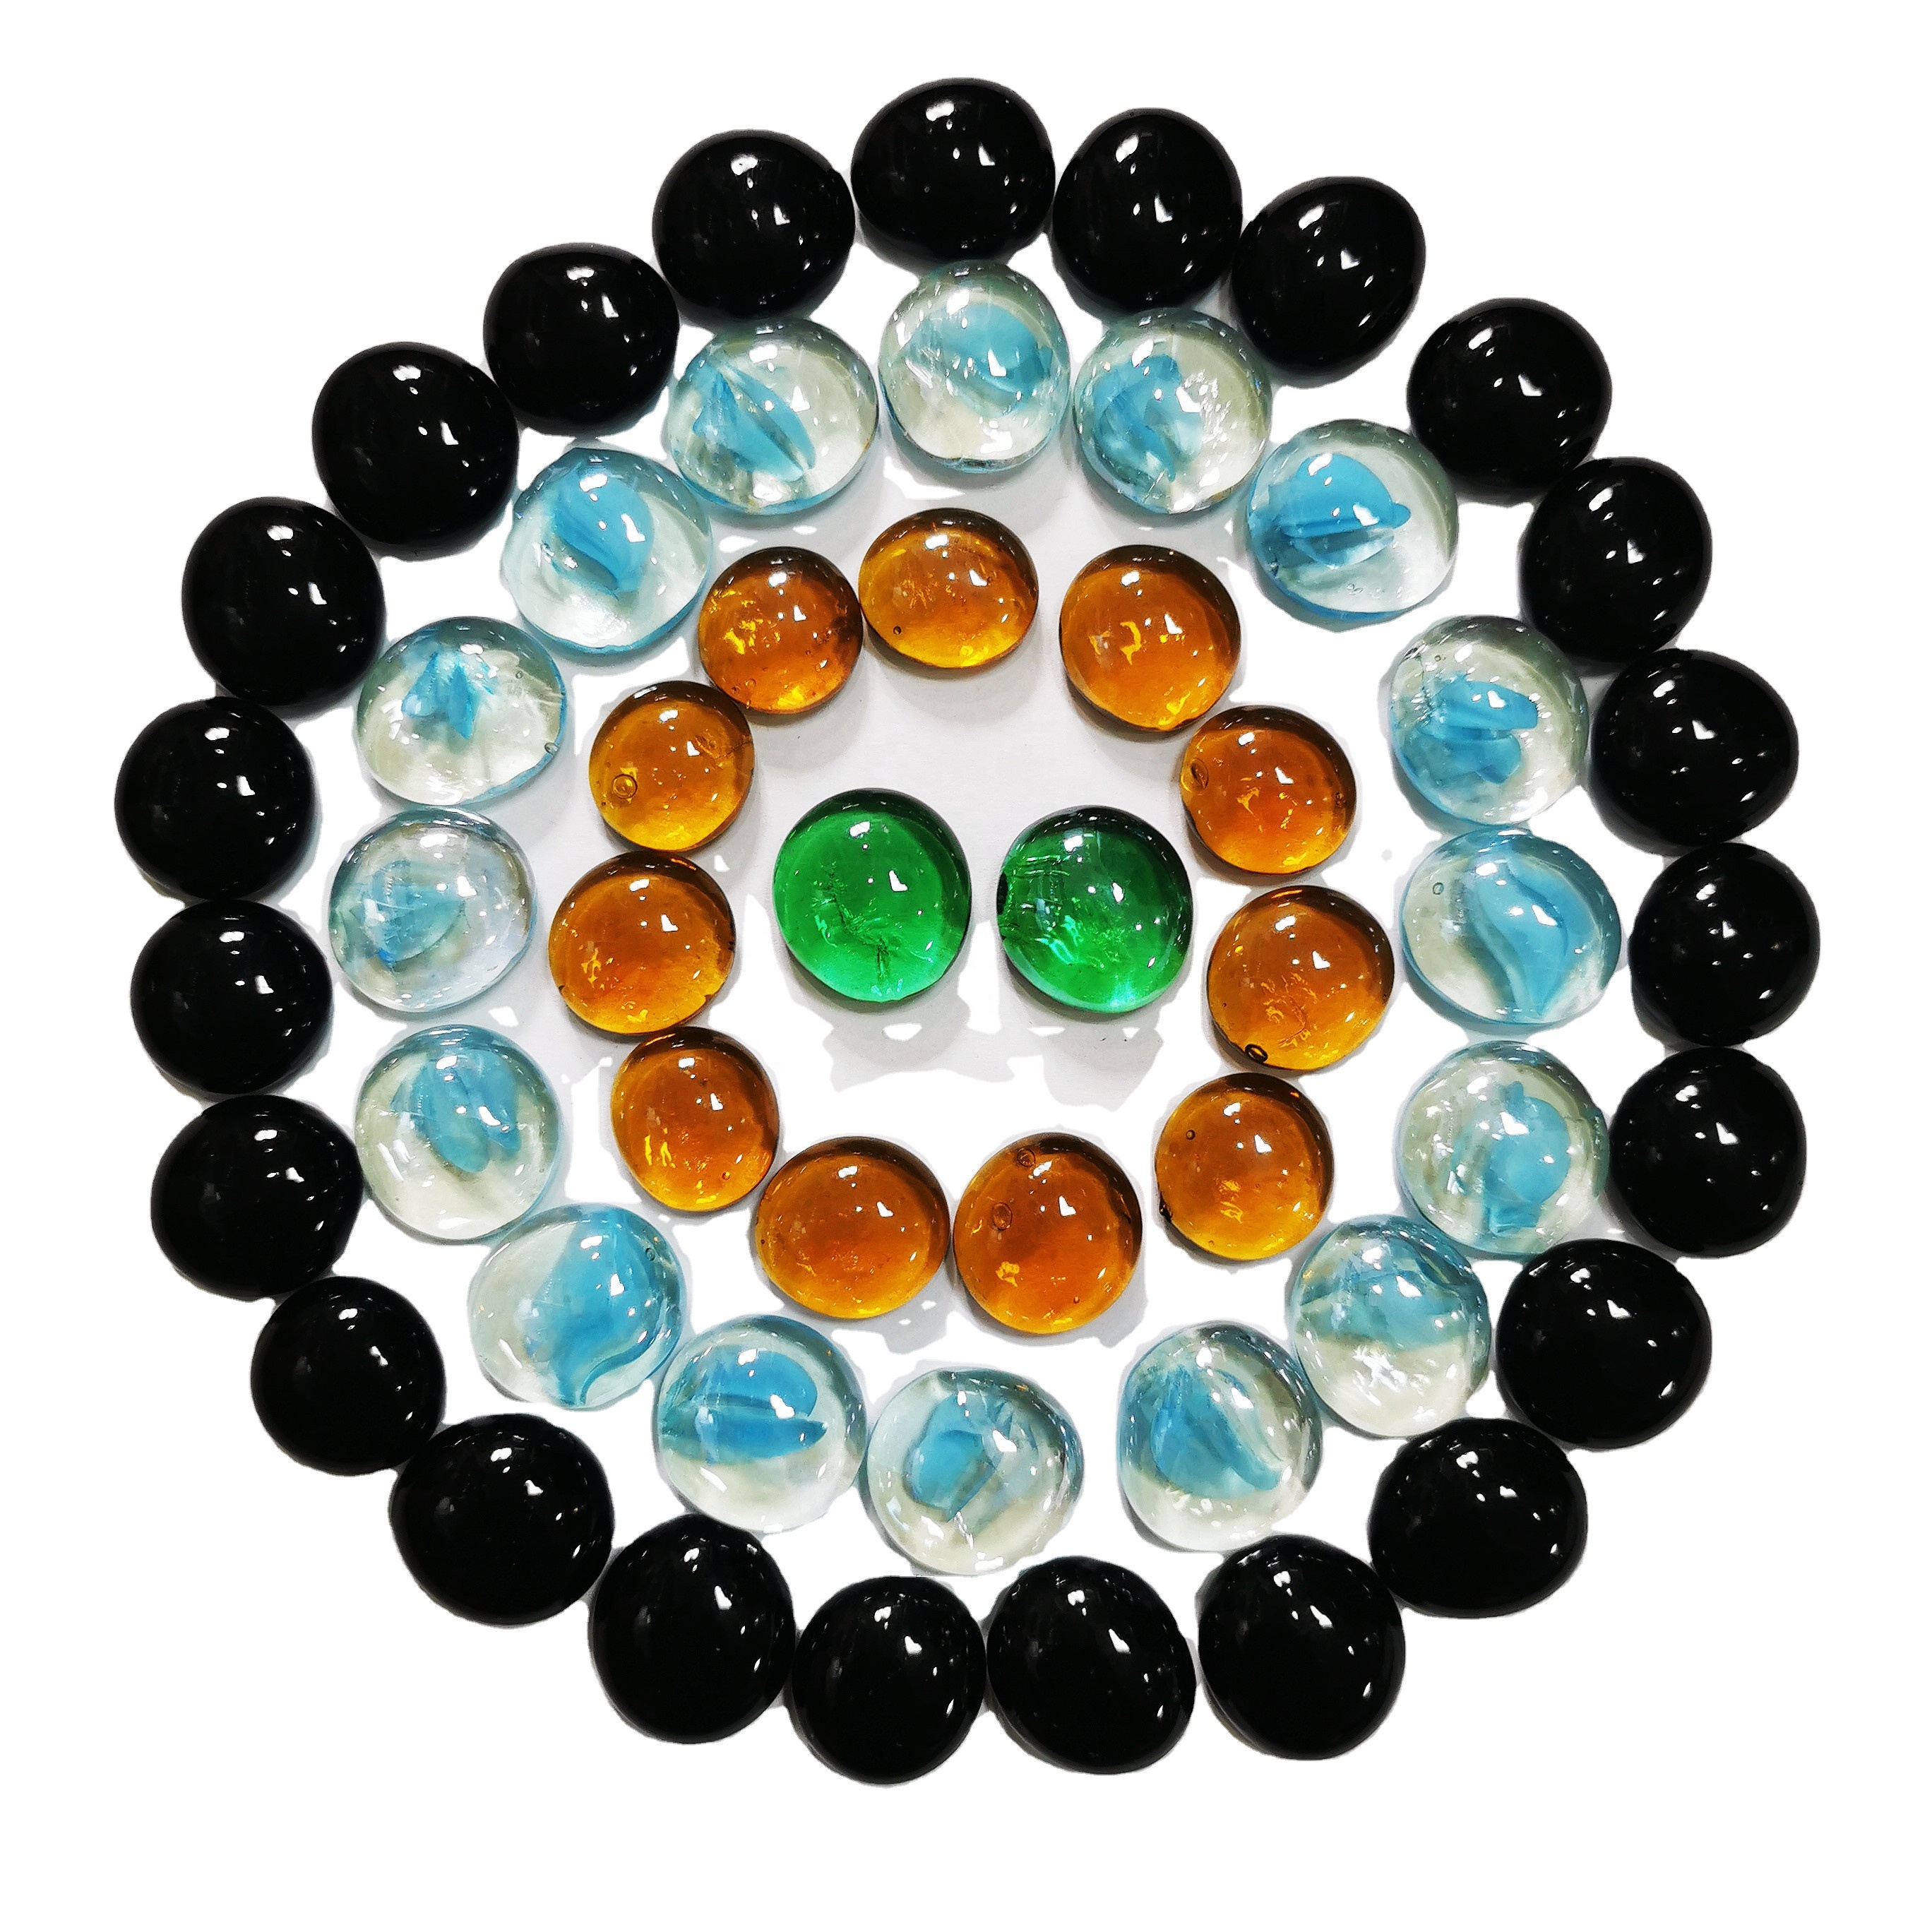 Mixed Color Glass Seed Bead Kits for DIY Jewelry Making,DIY Glass marbles